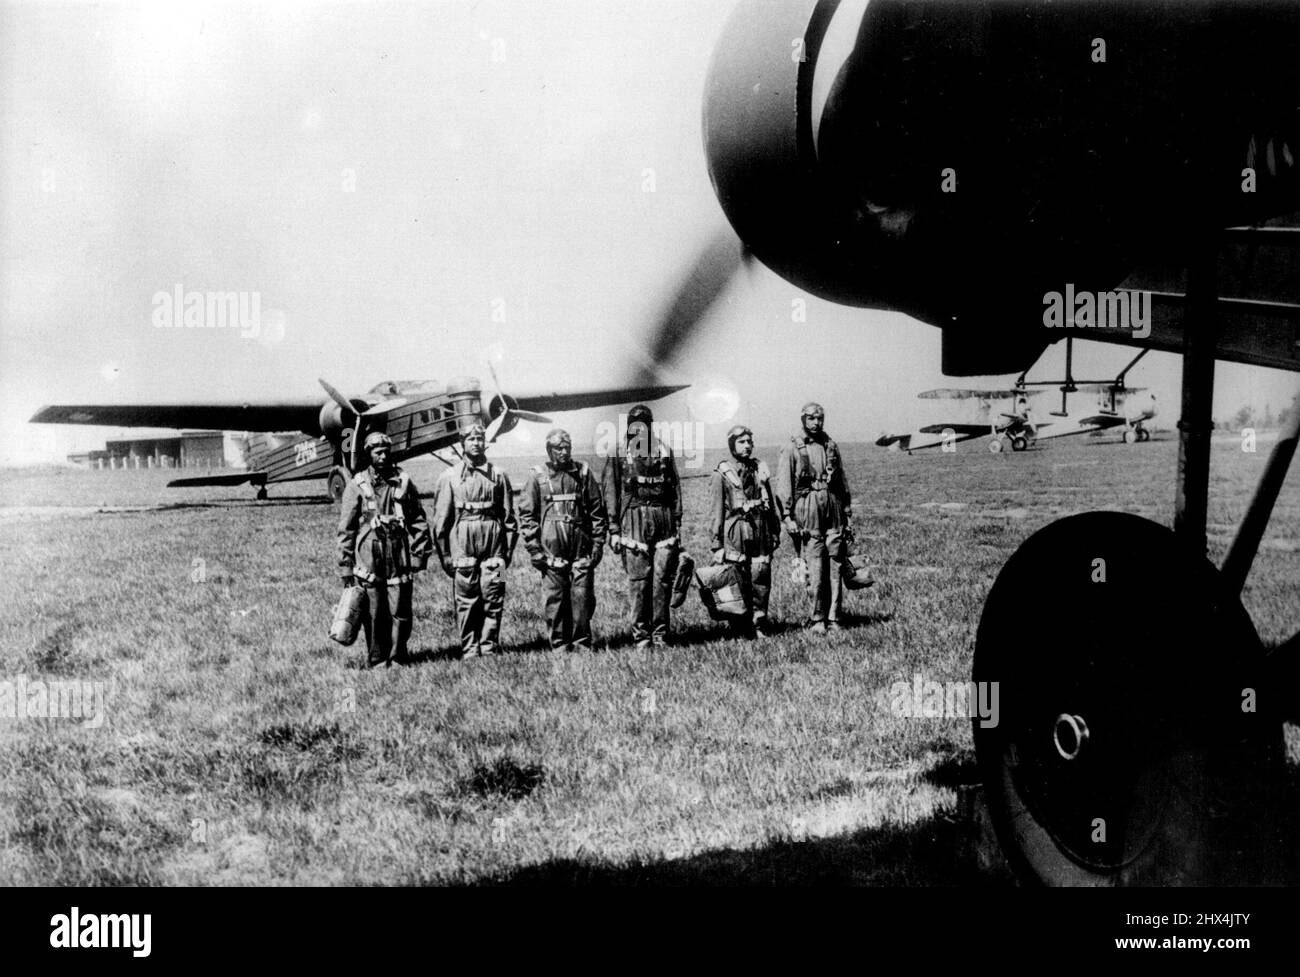 Czech Air Force Stands by During Crisis, Reserves called up. Czechoslovakian Air Force pilots in full kit with their machines on the military aerodrome near Prague. These pictures were made at a military aerodrome near Prague as pilots of the Czechoslovakian Air Force stood by in case of emergency as the tension between Germany and Czechoslovakia, intensified by the shooting of two Germans on the frontier, increased. Reports were circulated of troop movements in both Czechoslovakia and Germany before the municipal elections took place. Czechoslovakia called up 80,000 reservists. May 23, 1938. Stock Photo